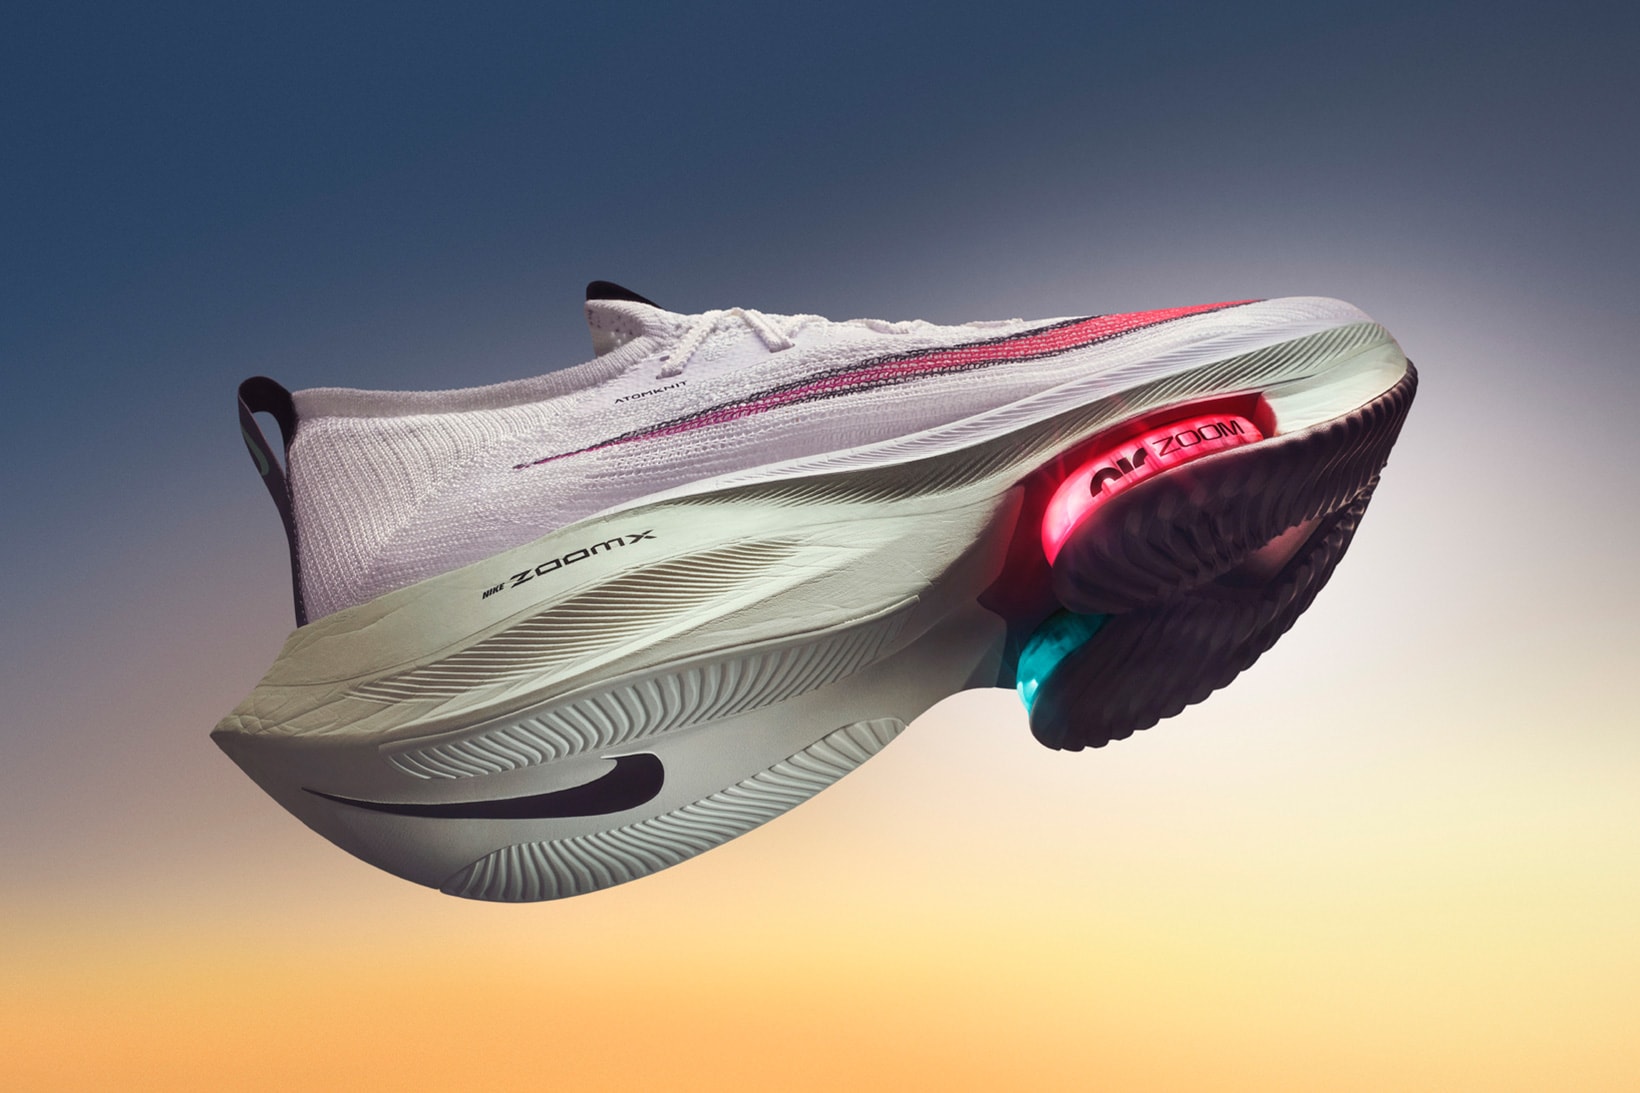 nike air zoom new colorways alphafly vaporfly tempo pegasus 37 next running